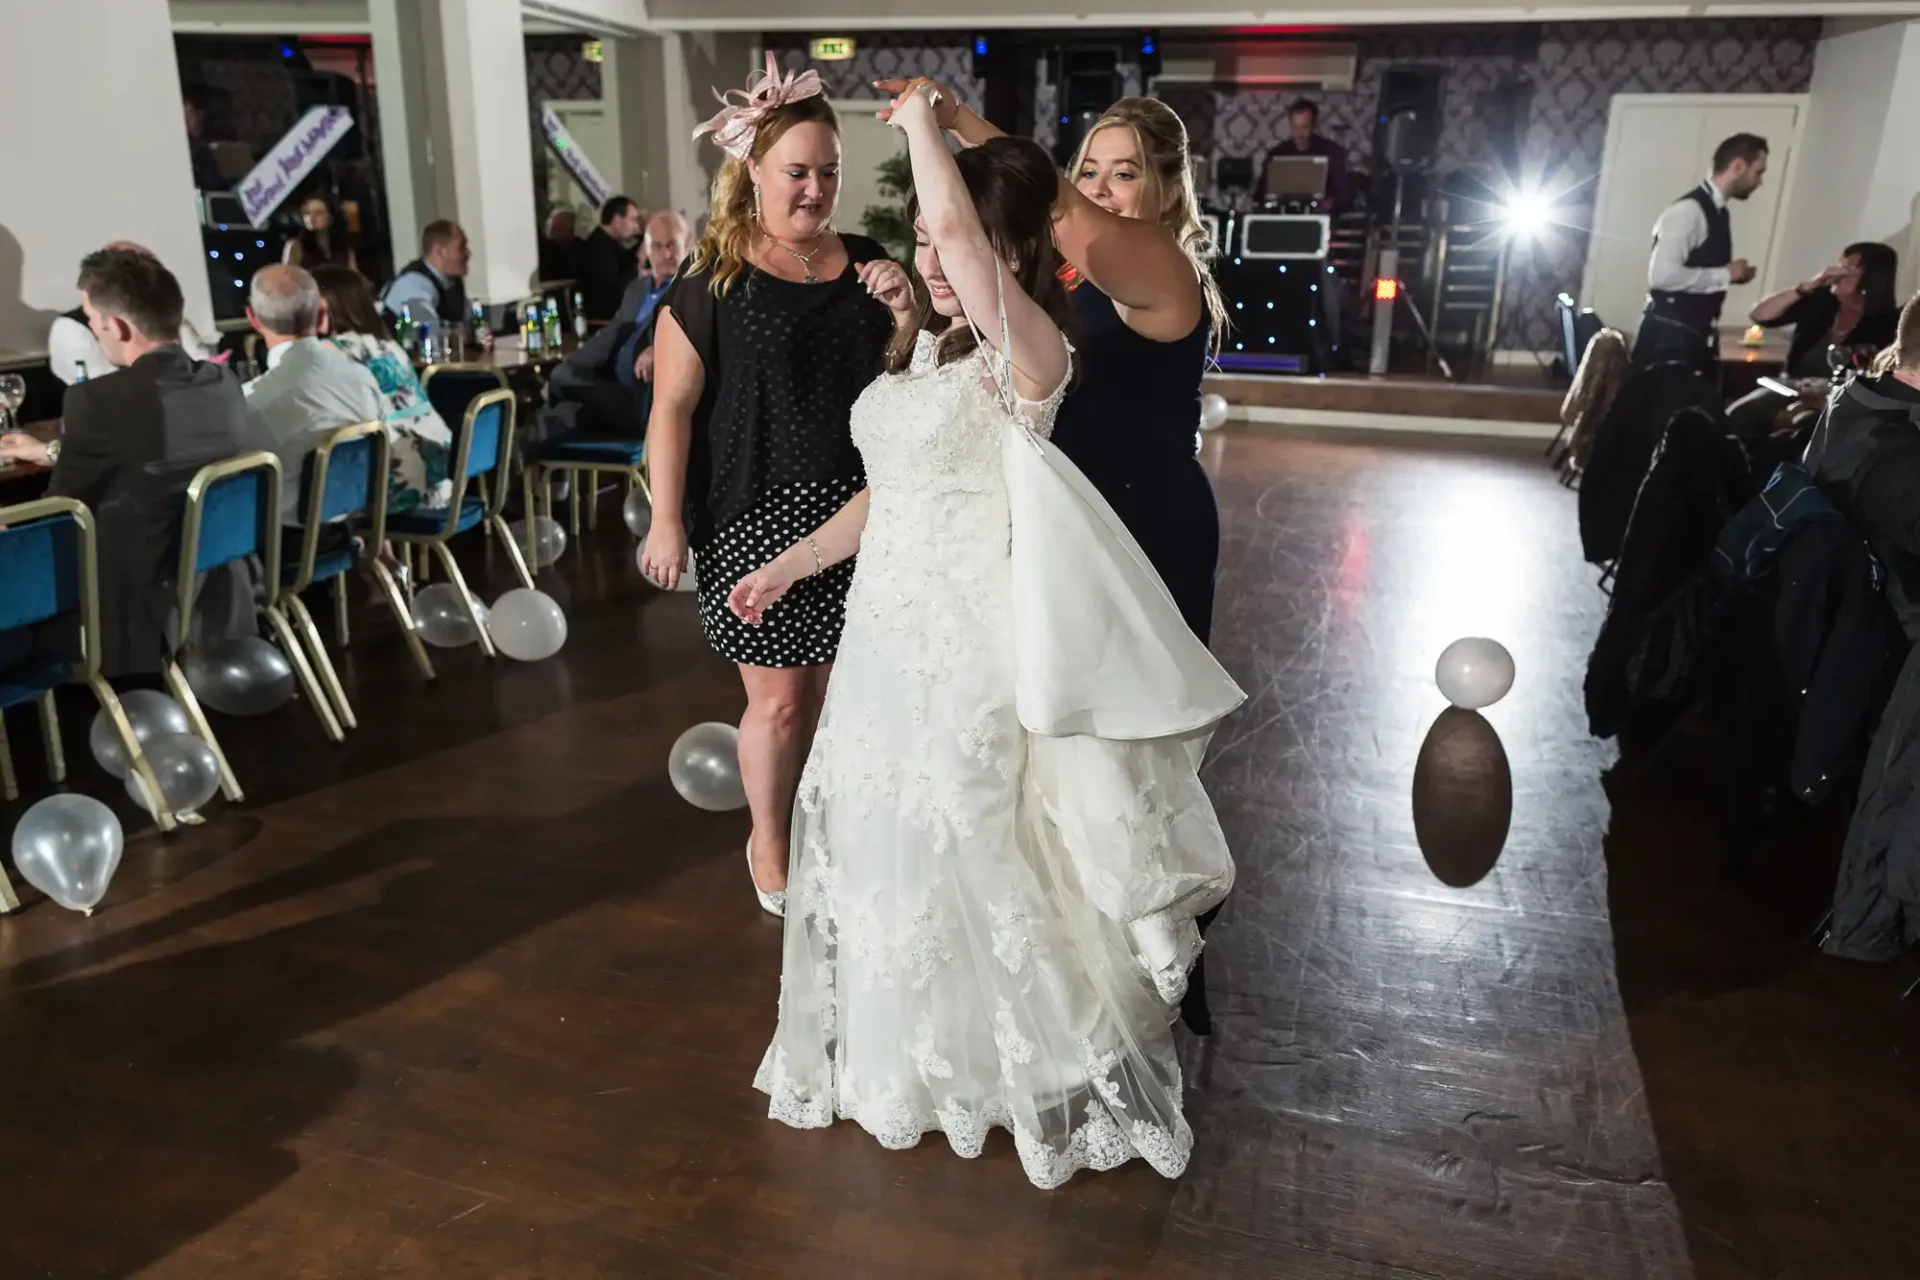 Three women dancing joyously at a wedding reception, two assisting the bride with her veil on the dance floor.